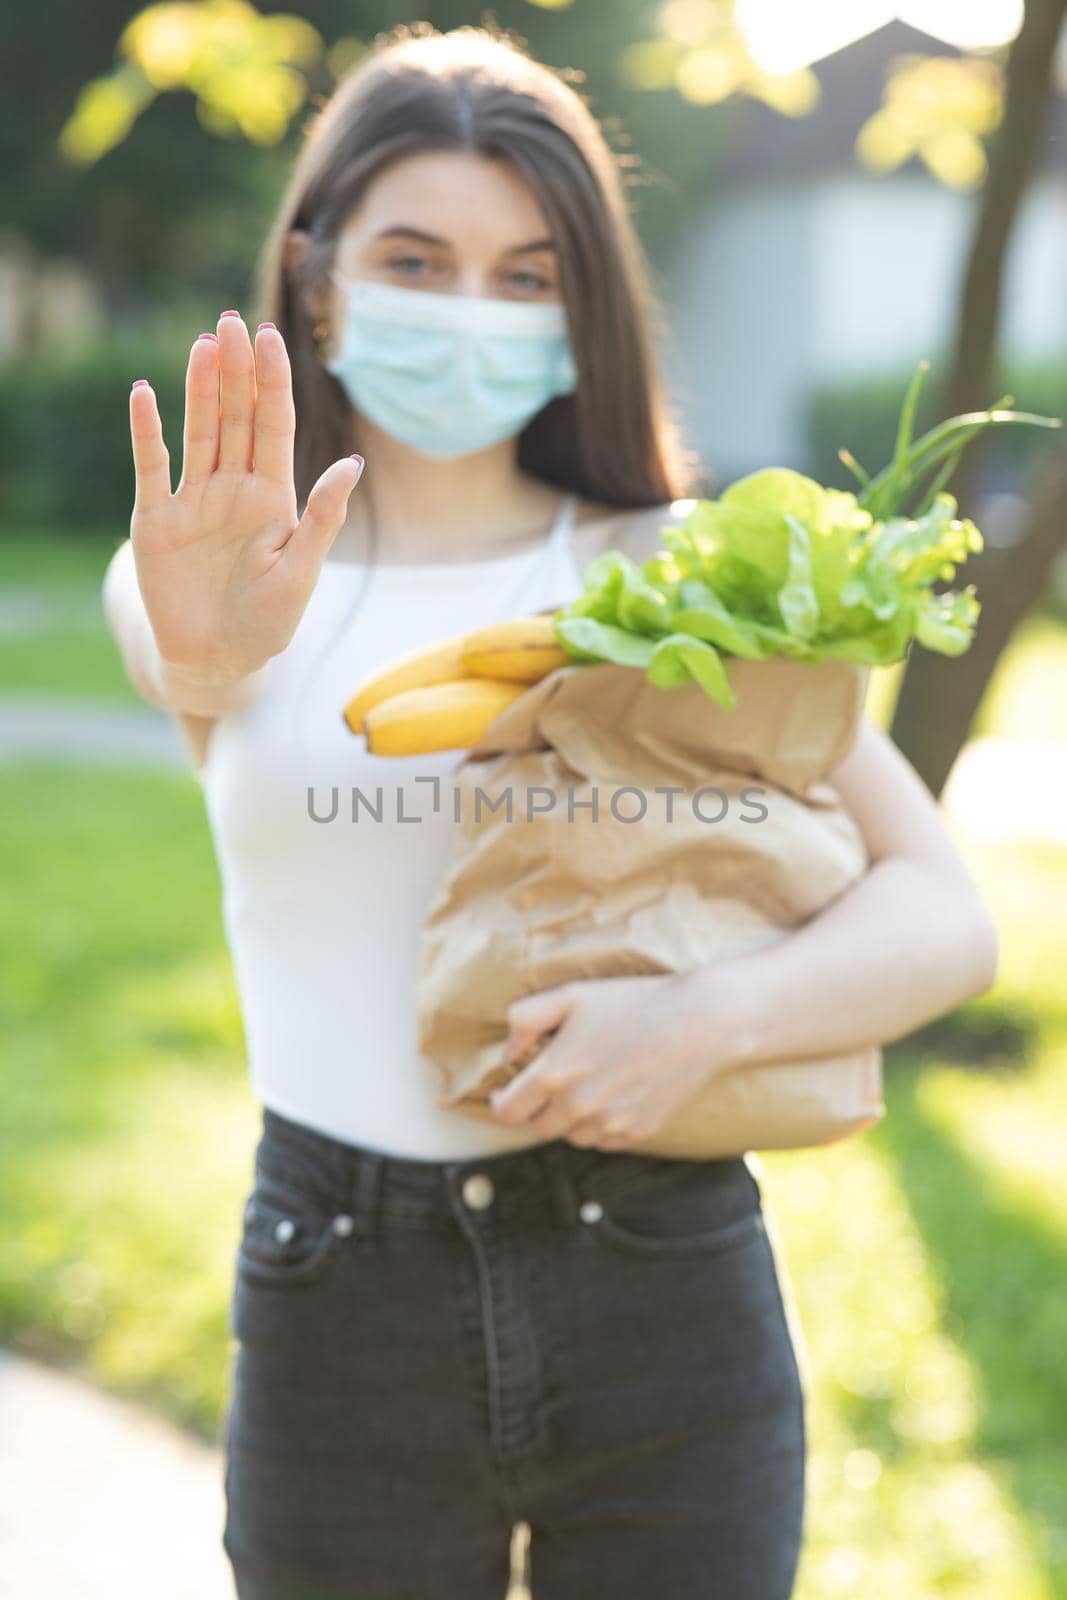 Portrait of a young woman wearing protective mask makes stop sign with hand, saying no, expressing restriction. Concept health and safety, N1H1 coronavirus quarantine, virus protection.